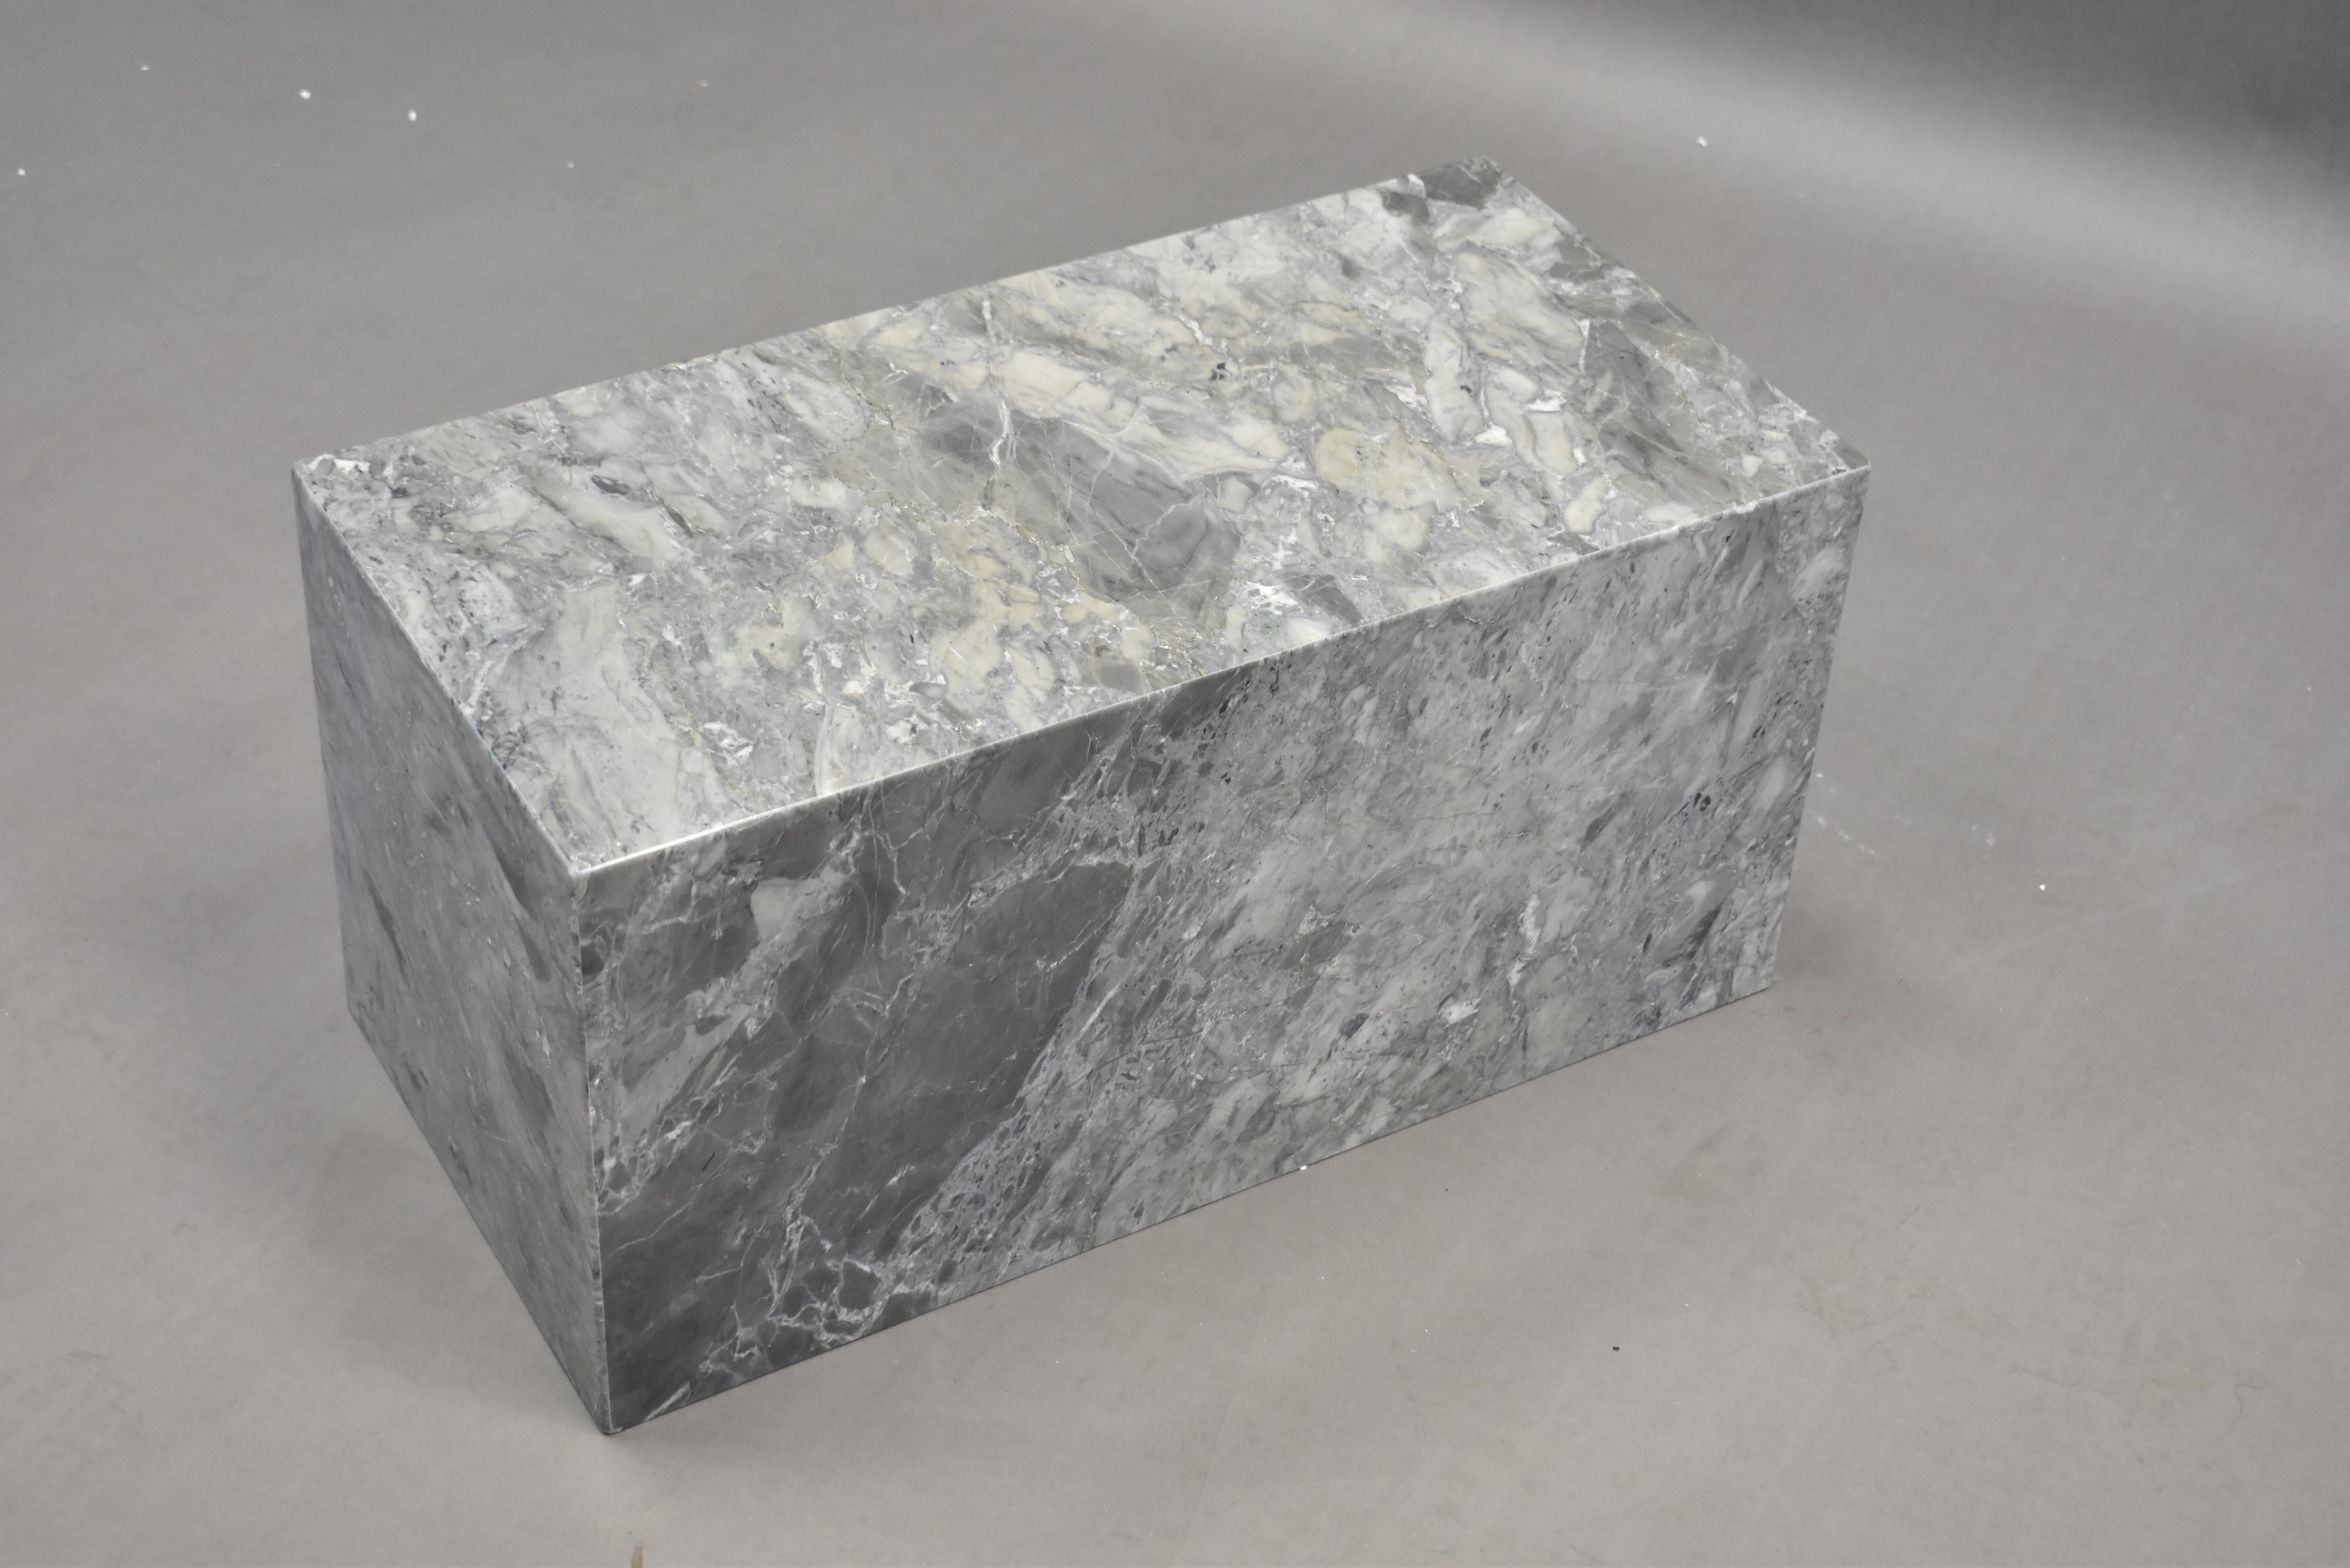 Brand new and sleek side table made from polished Cleopatra Grey marble. In tones of grey, gunmetal and white. Displays striking veining and movement to capture the beauty of the stone material.